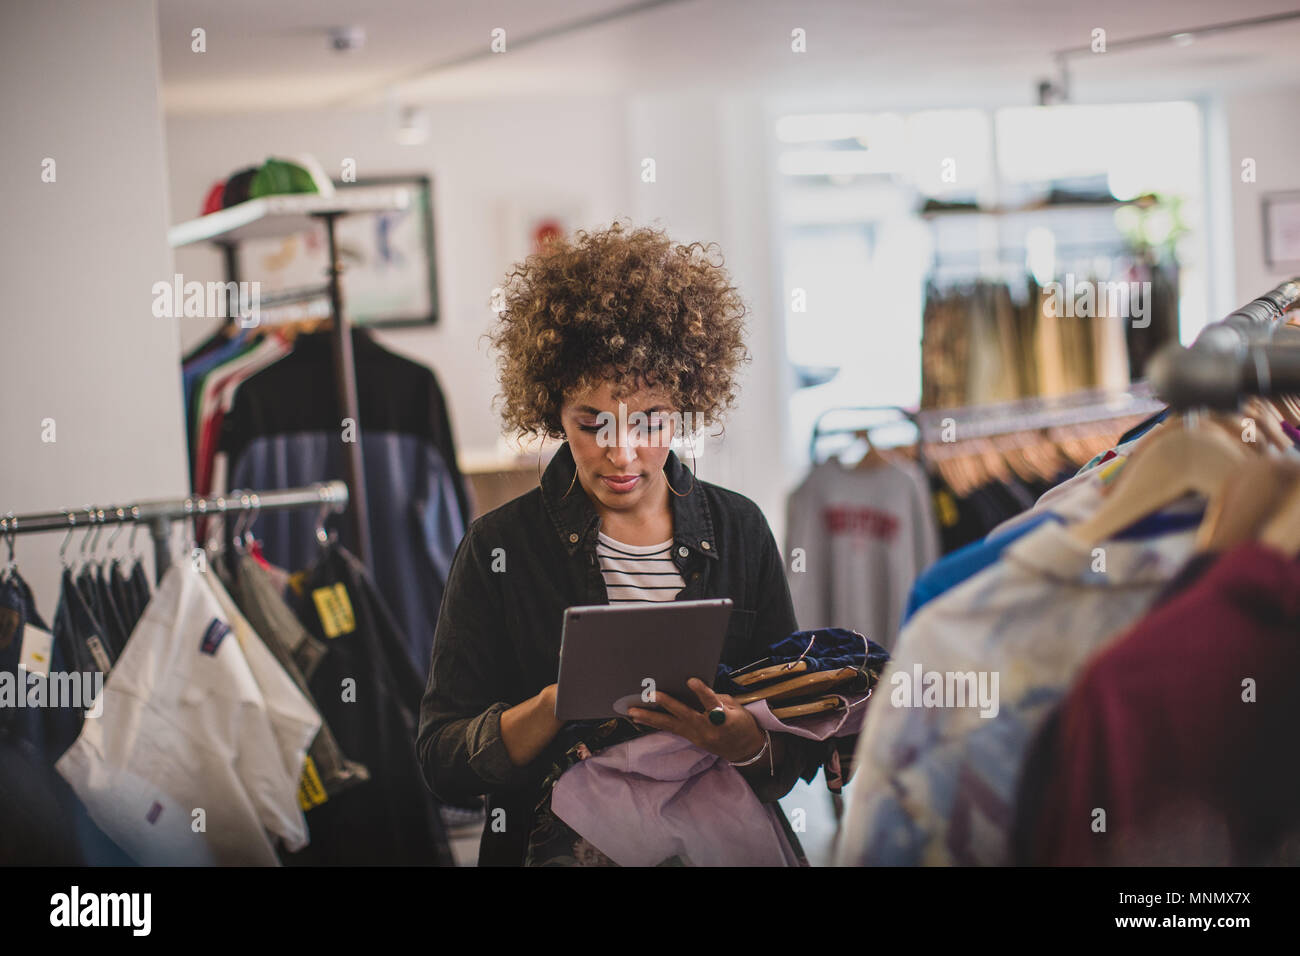 Store manager using digital tablet in a clothing store Stock Photo